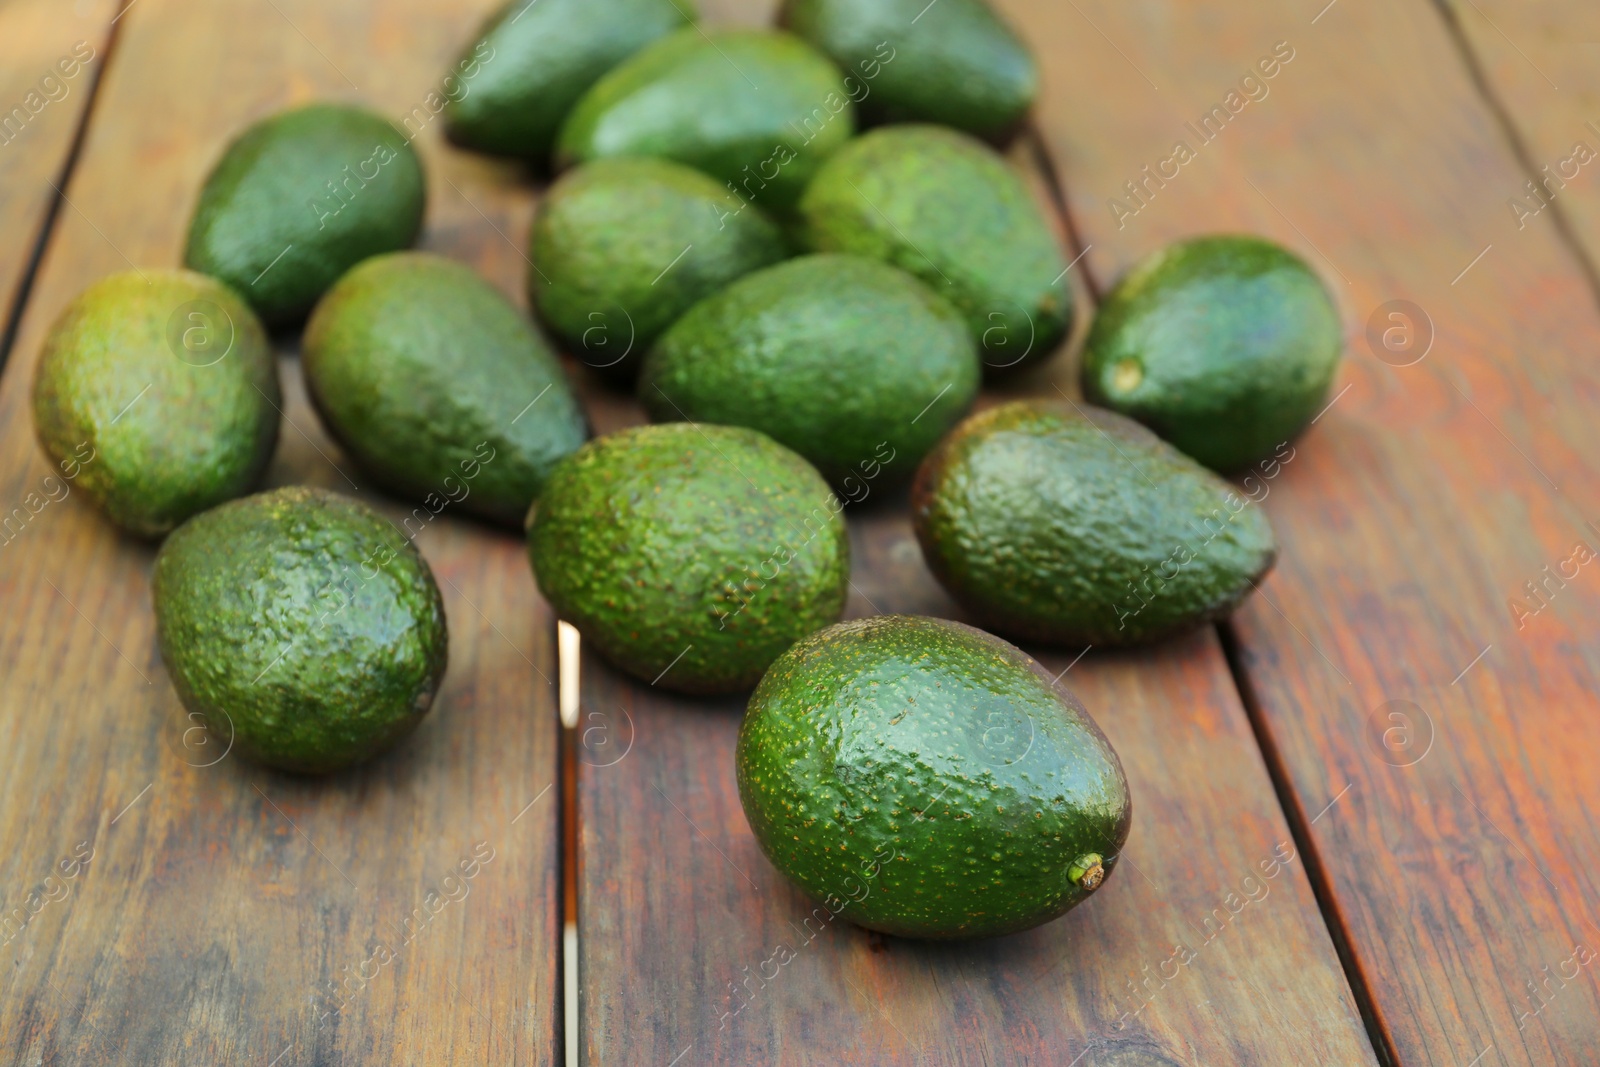 Photo of Tasty ripe avocados on wooden table outdoors